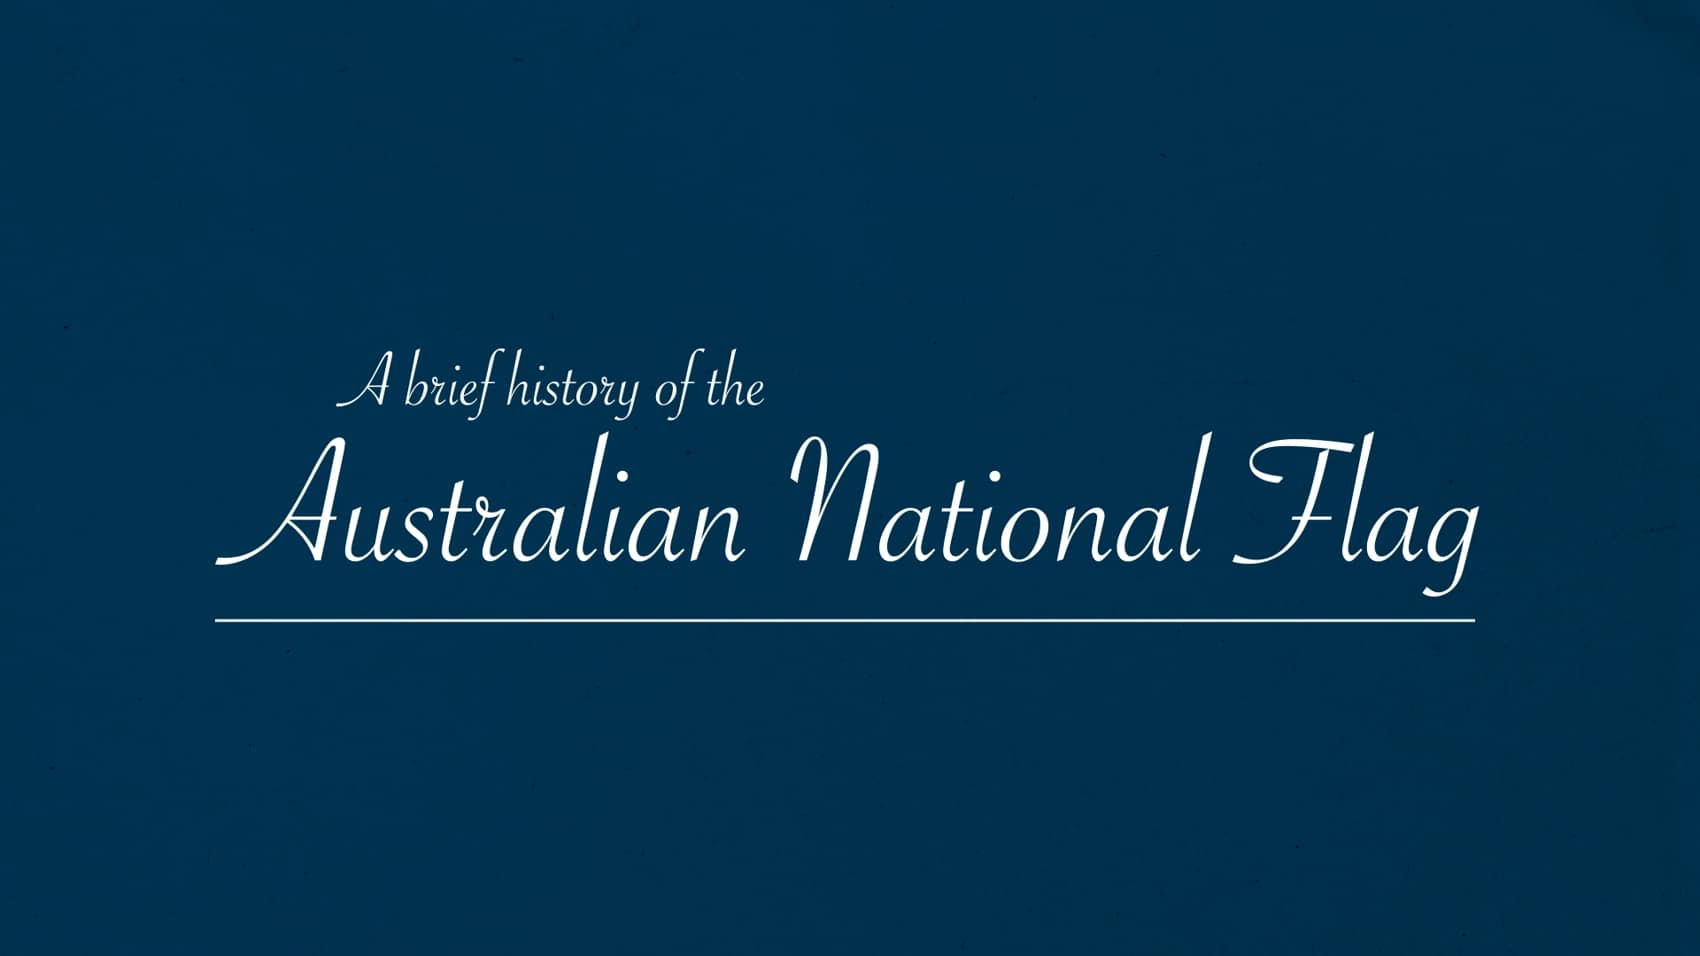 Australian National | Department of the and